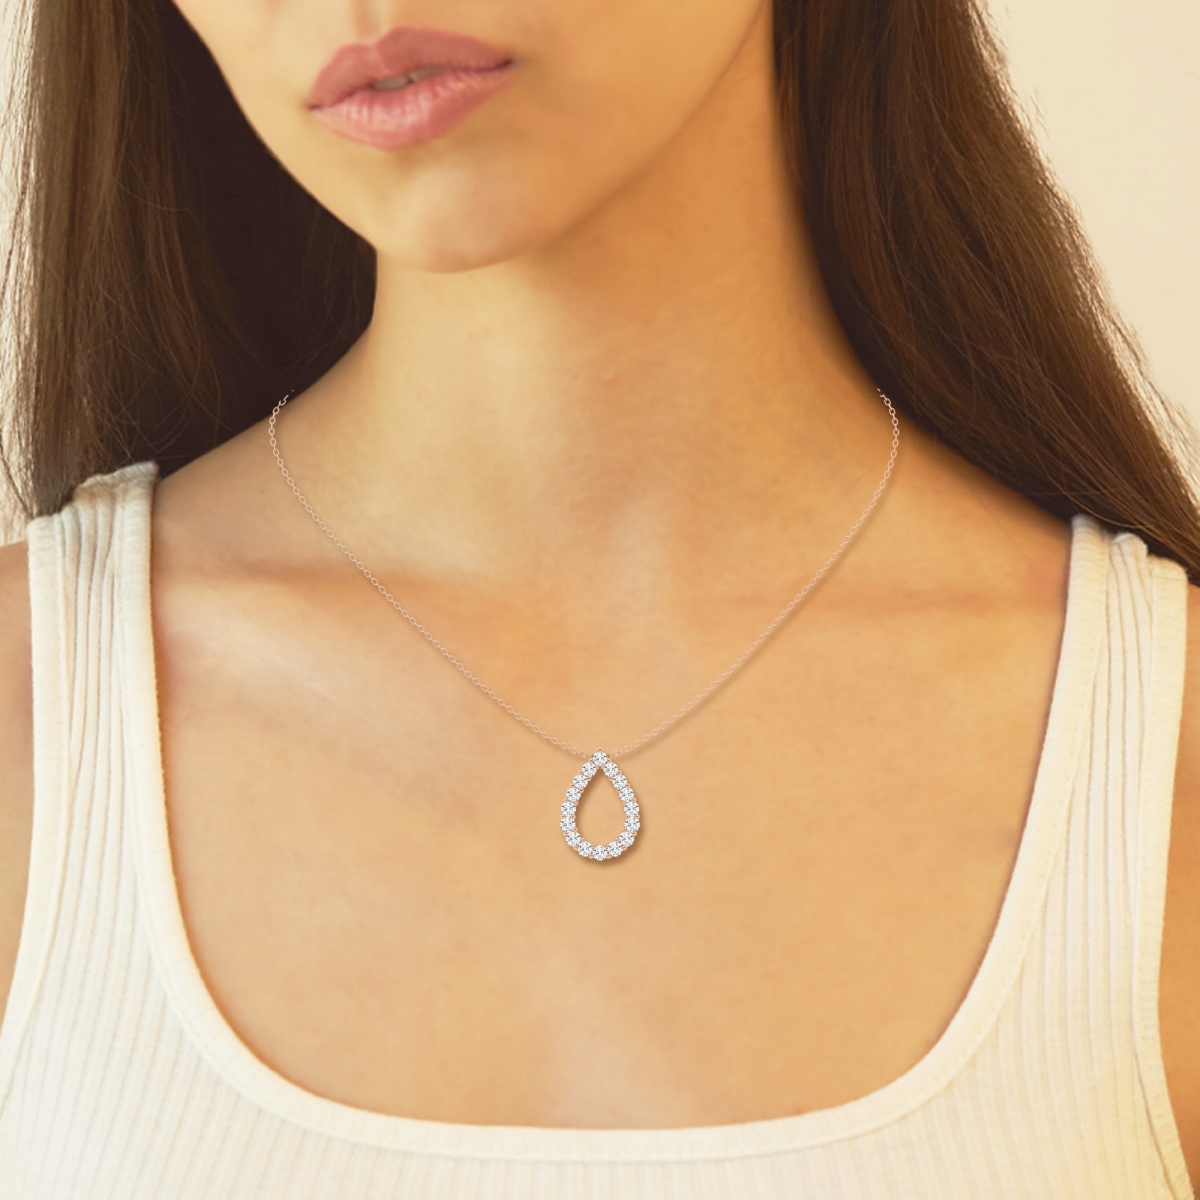 Additional Image 2 for  1 ctw Round Lab Grown Diamond Teardrop Fashion Pendant with Adjustable Chain